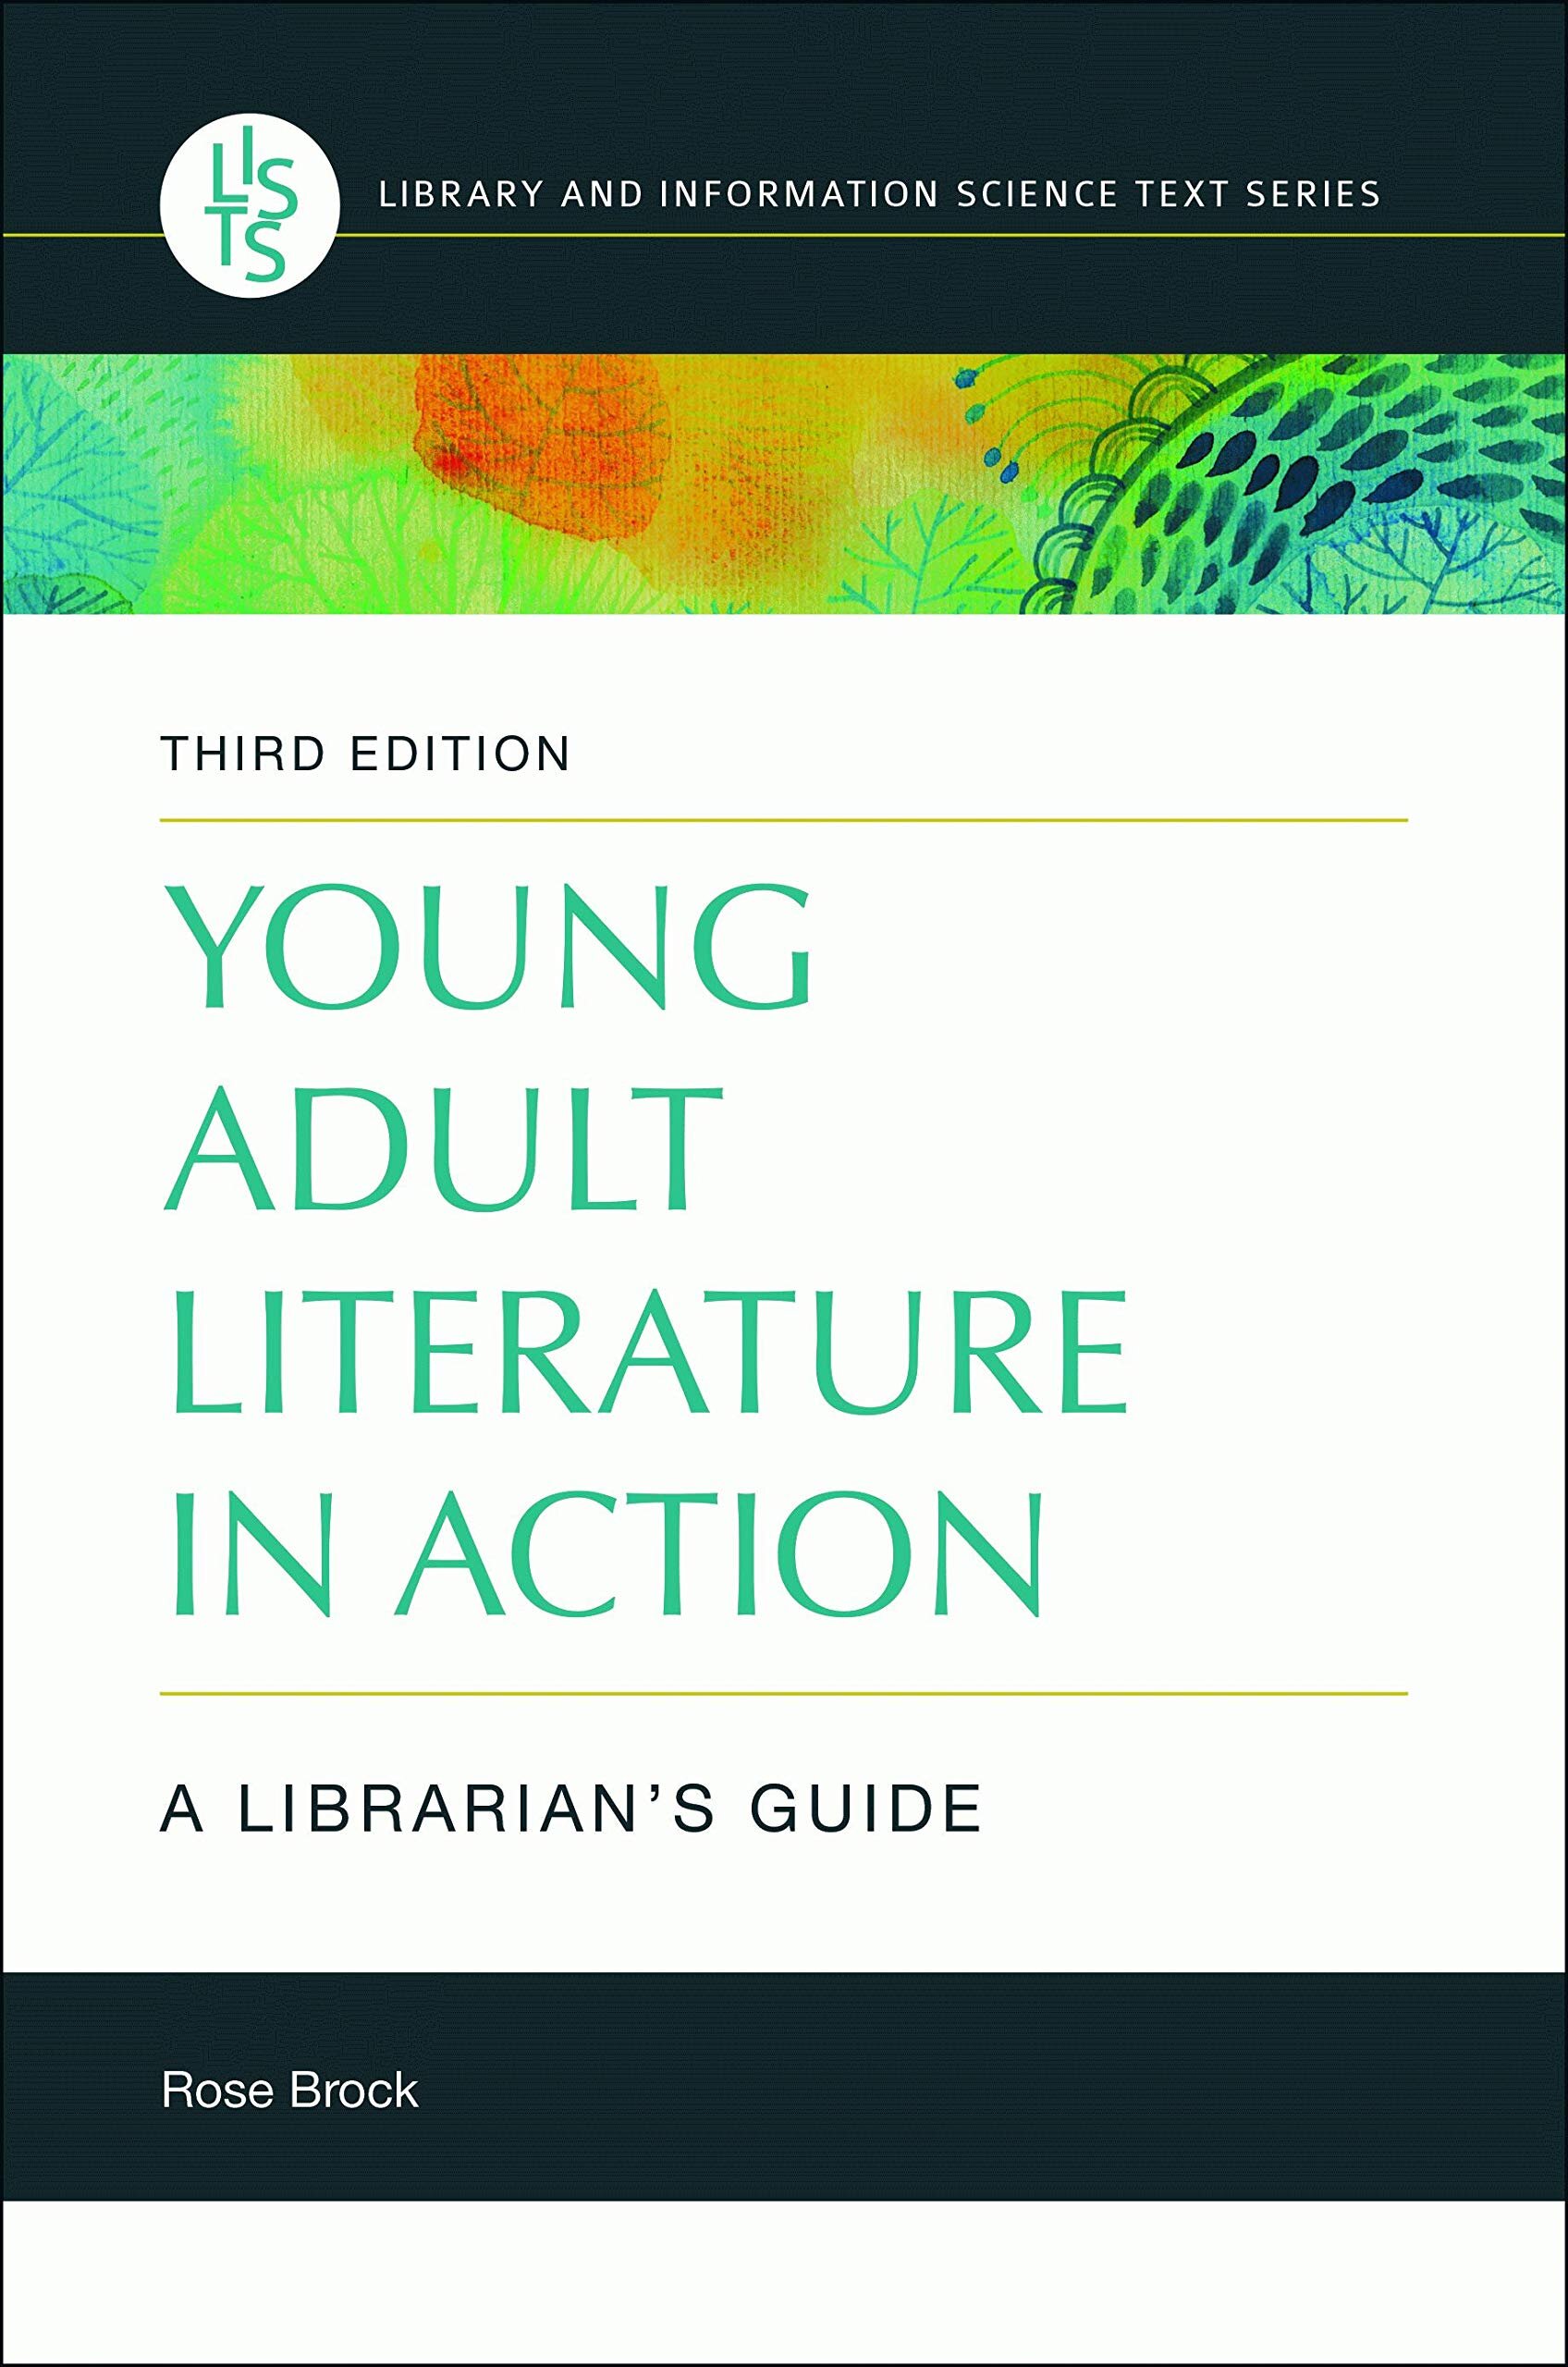 Libraries guide